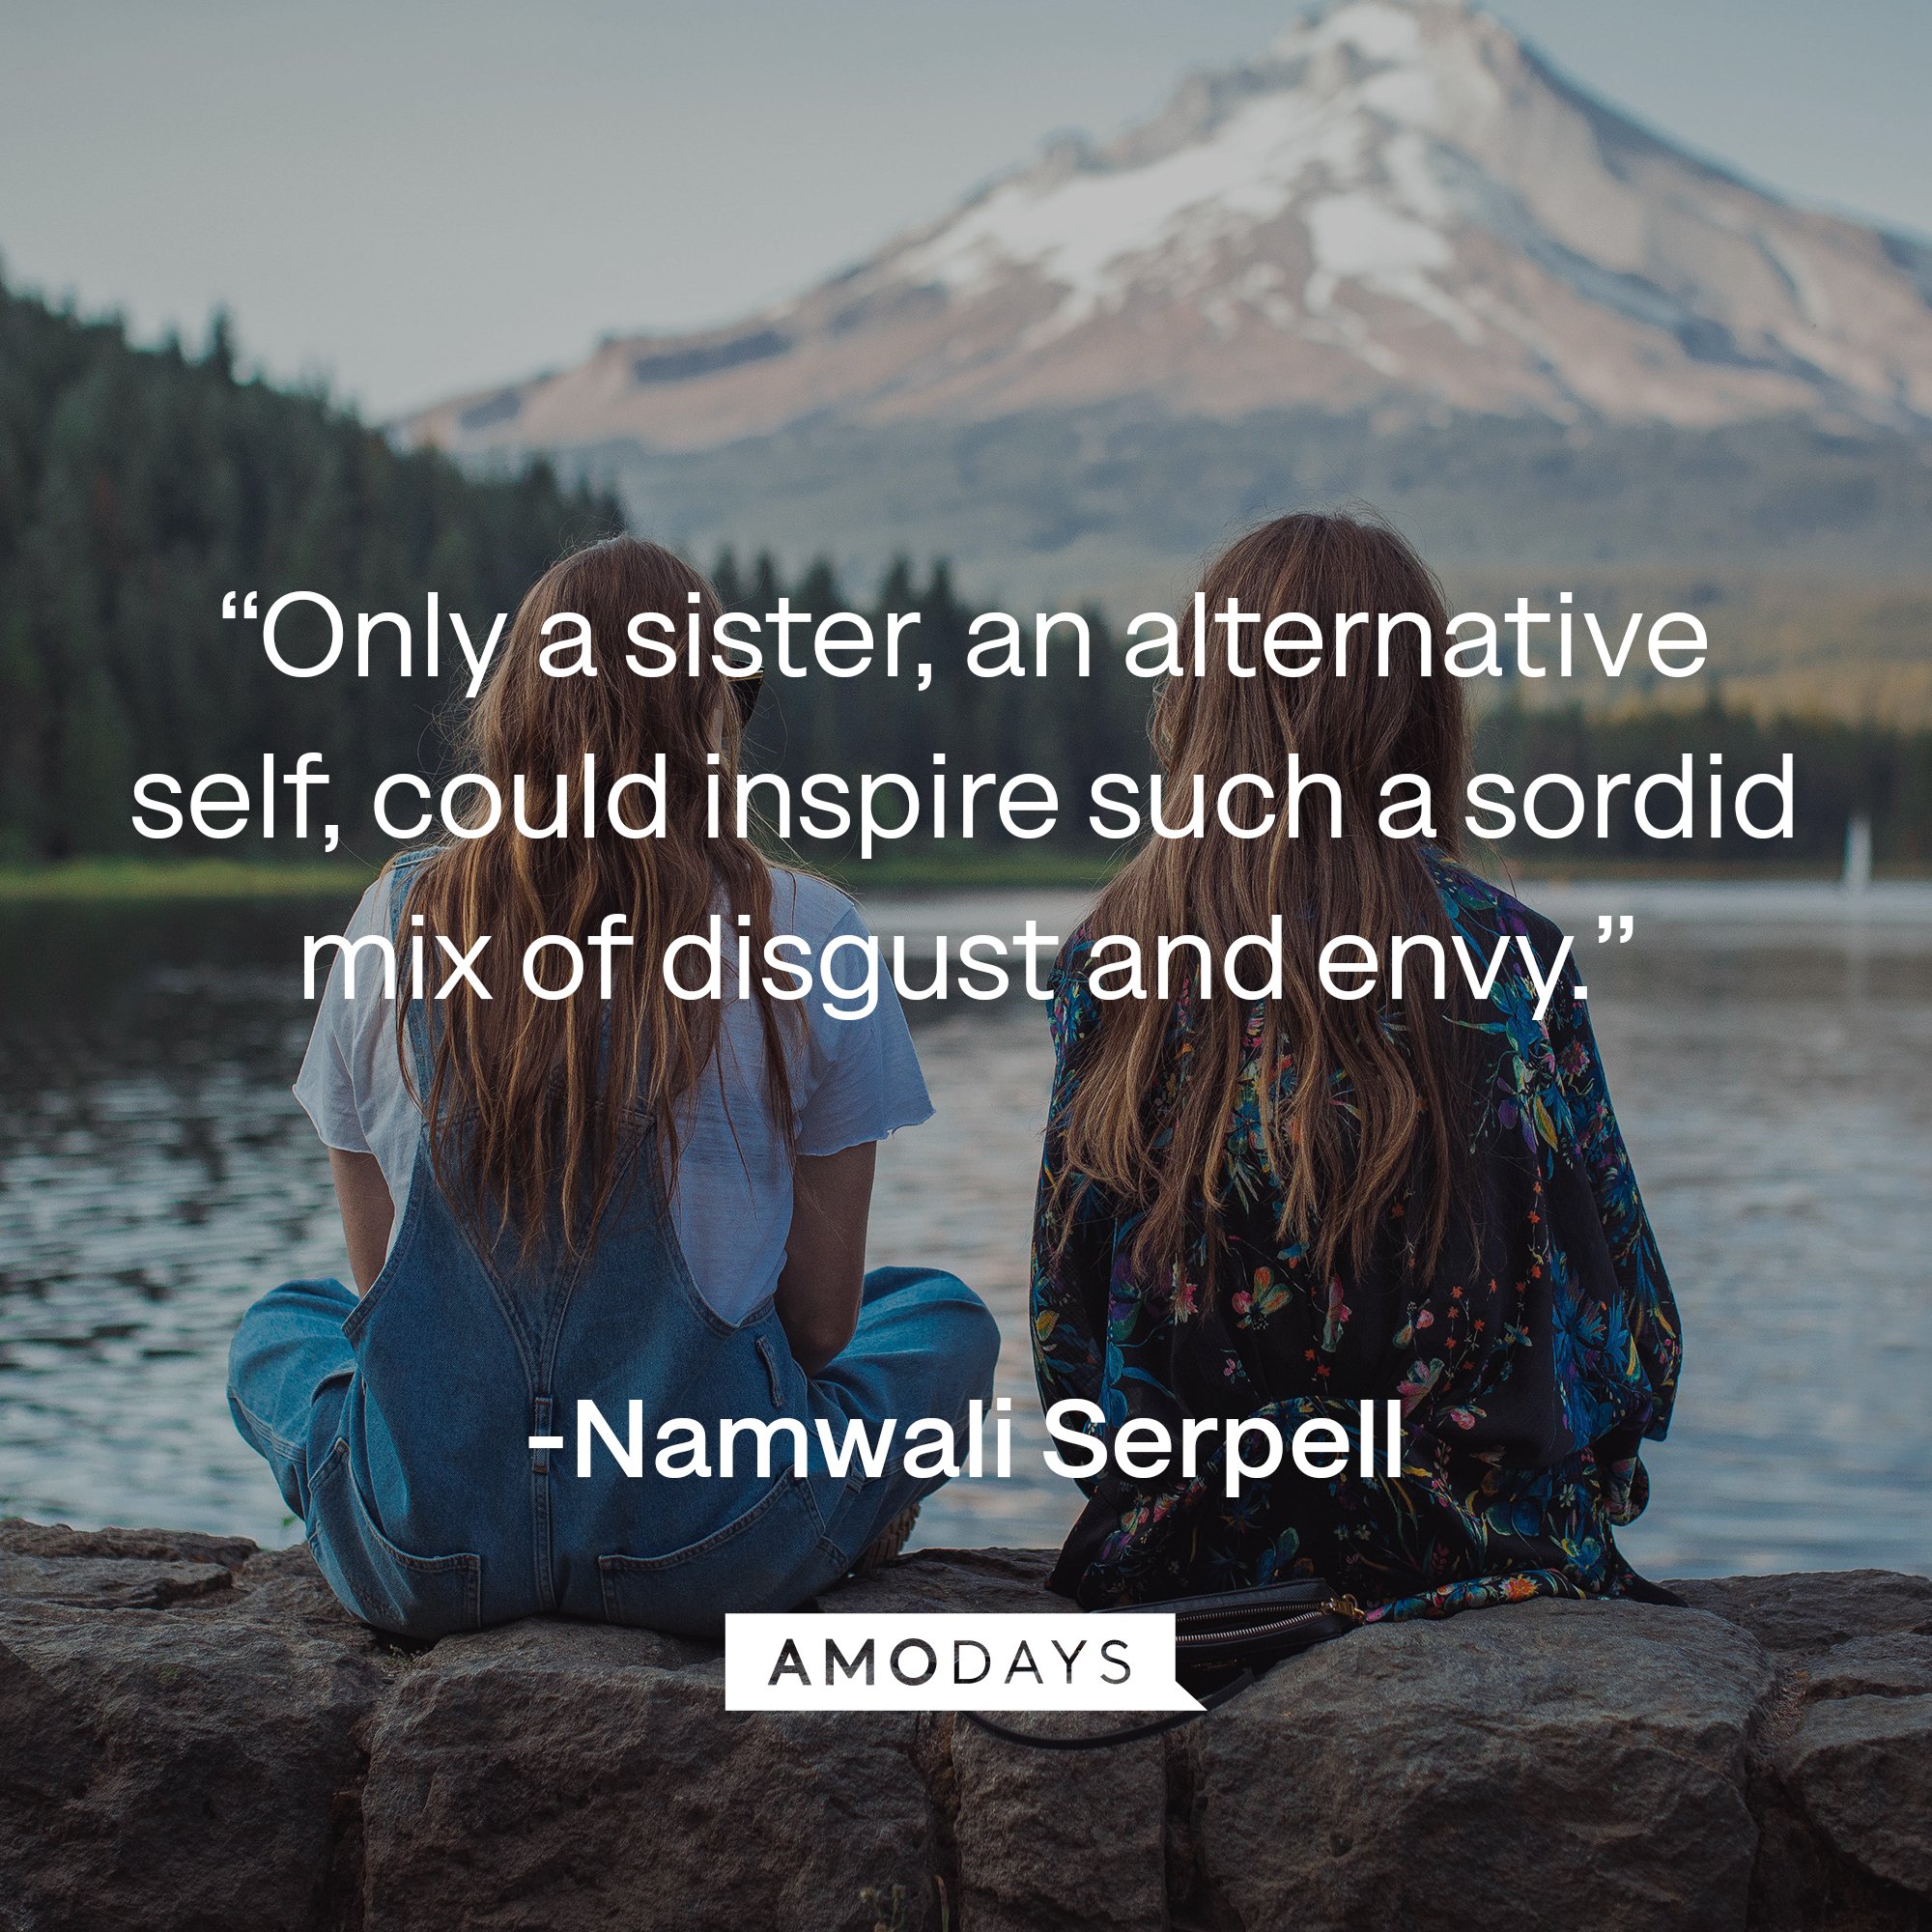 Namwali Serpell's quote: “Only a sister, an alternative self, could inspire such a sordid mix of disgust and envy.” | Image: AmoDays